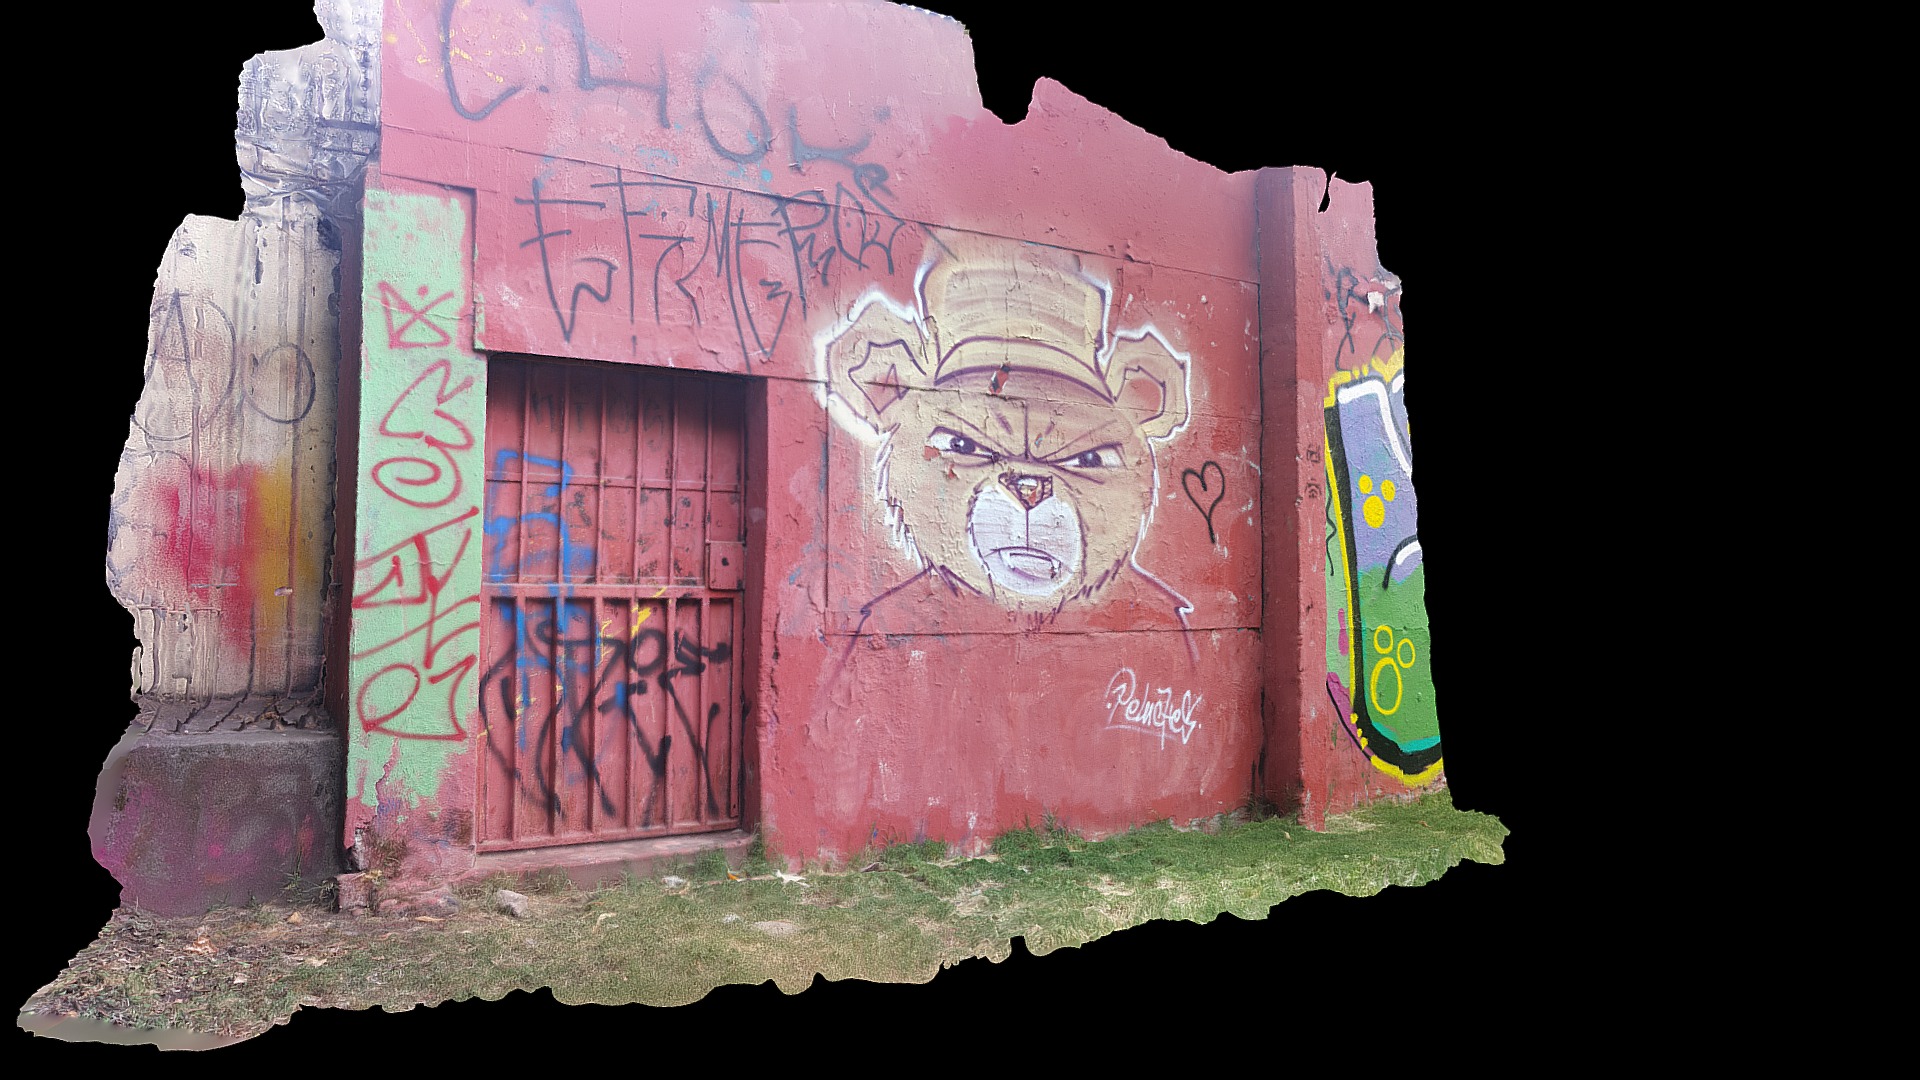 3D model 2017-02 – Santiago – Muralla 01 - This is a 3D model of the 2017-02 - Santiago - Muralla 01. The 3D model is about a pink door with graffiti on it.